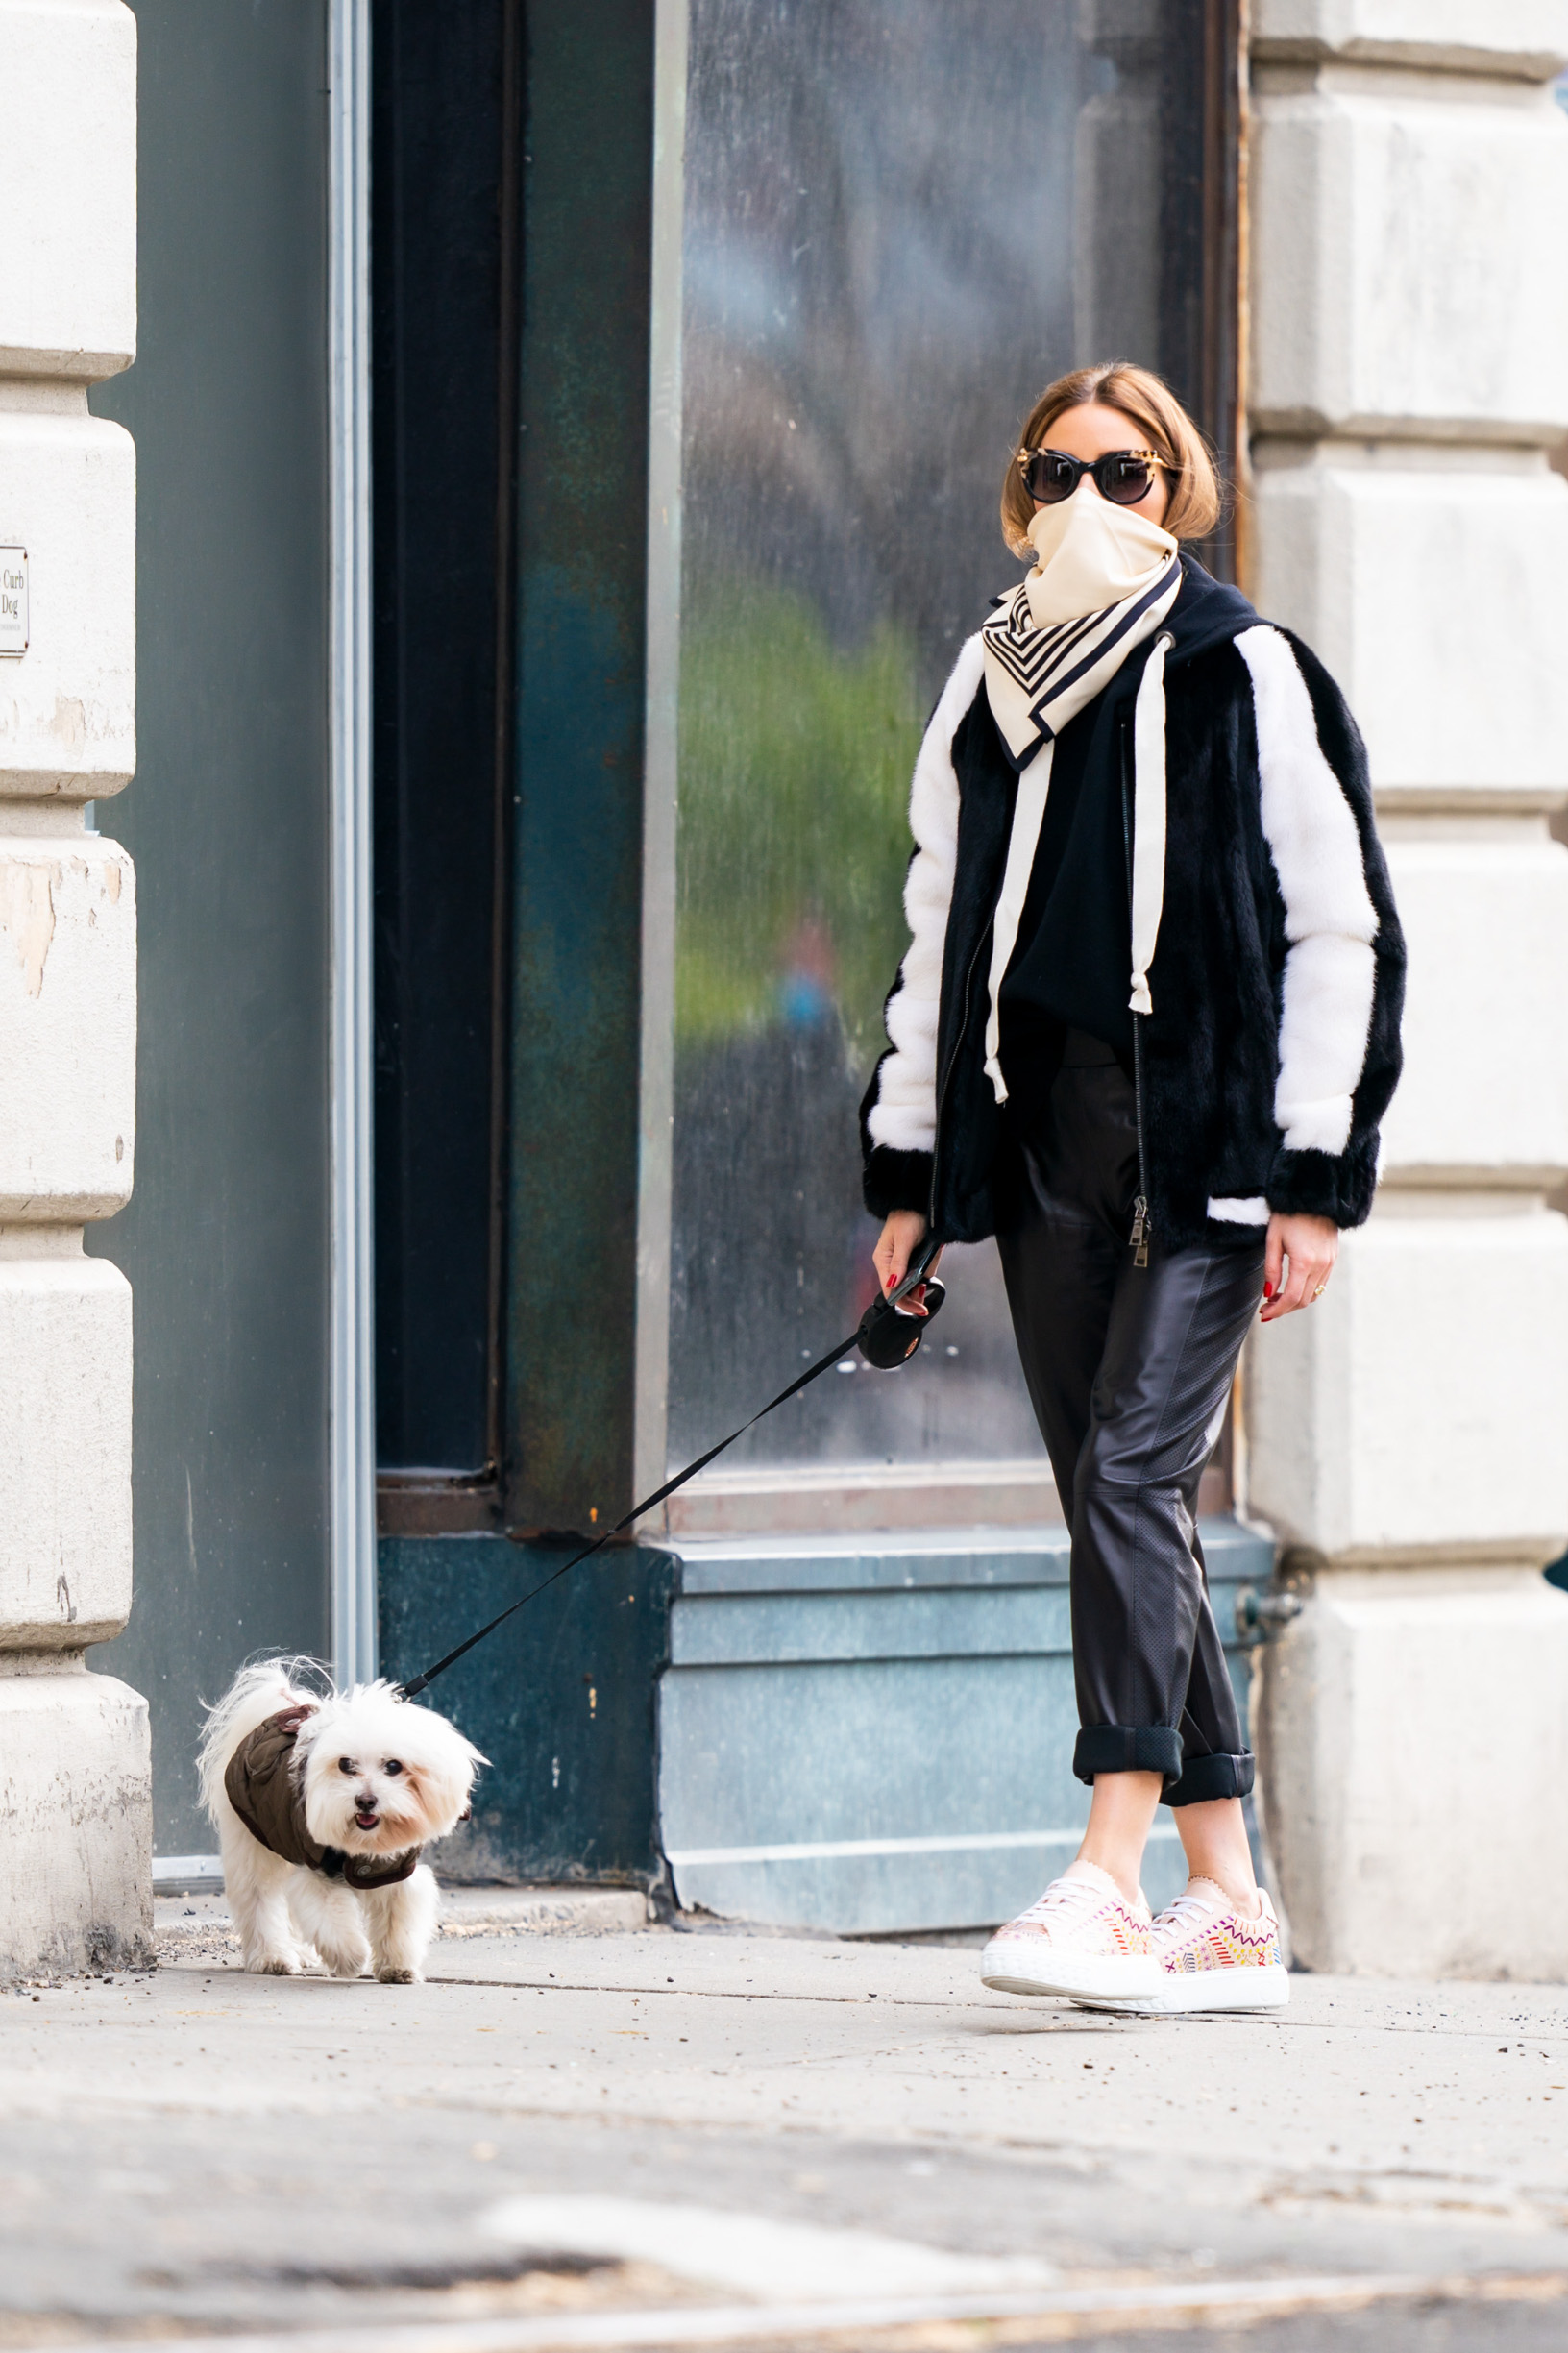 04/28/2020 EXCLUSIVE: Olivia Palermo steps out for a dog walk in New York City. The 34 year old socialite wore a scarf over her mouth, black & white teddy coat, black trousers, and pink trainers., Image: 515744874, License: Rights-managed, Restrictions: Exclusive NO usage without agreed price and terms. Please contact sales@theimagedirect.com, Model Release: no, Credit line: TheImageDirect.com / The Image Direct / Profimedia